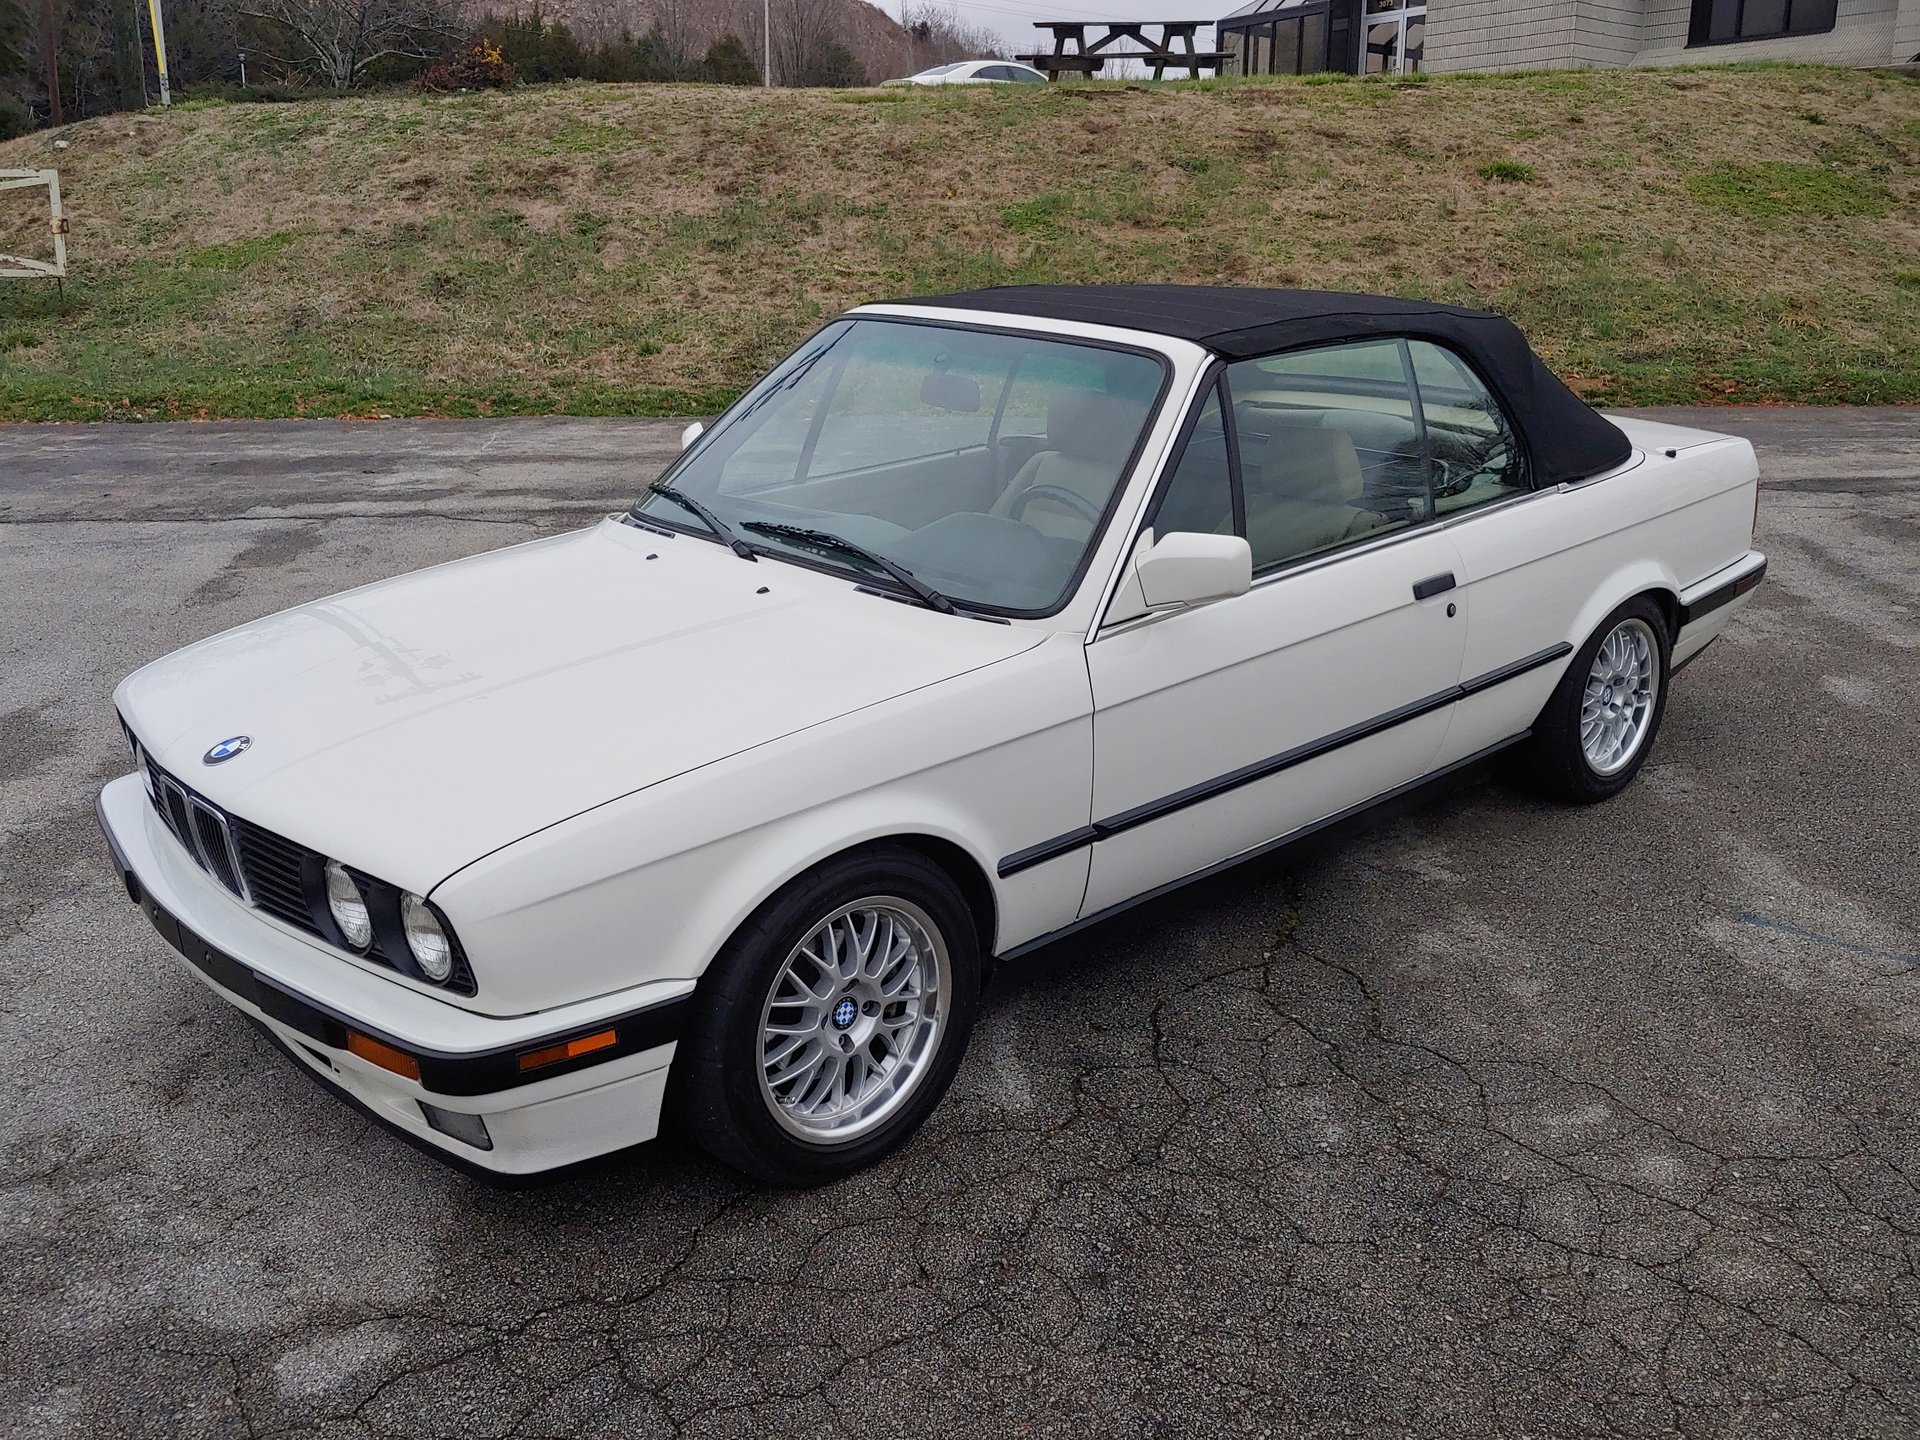 Youan: Bmw E30 Convertible For Sale In South Africa